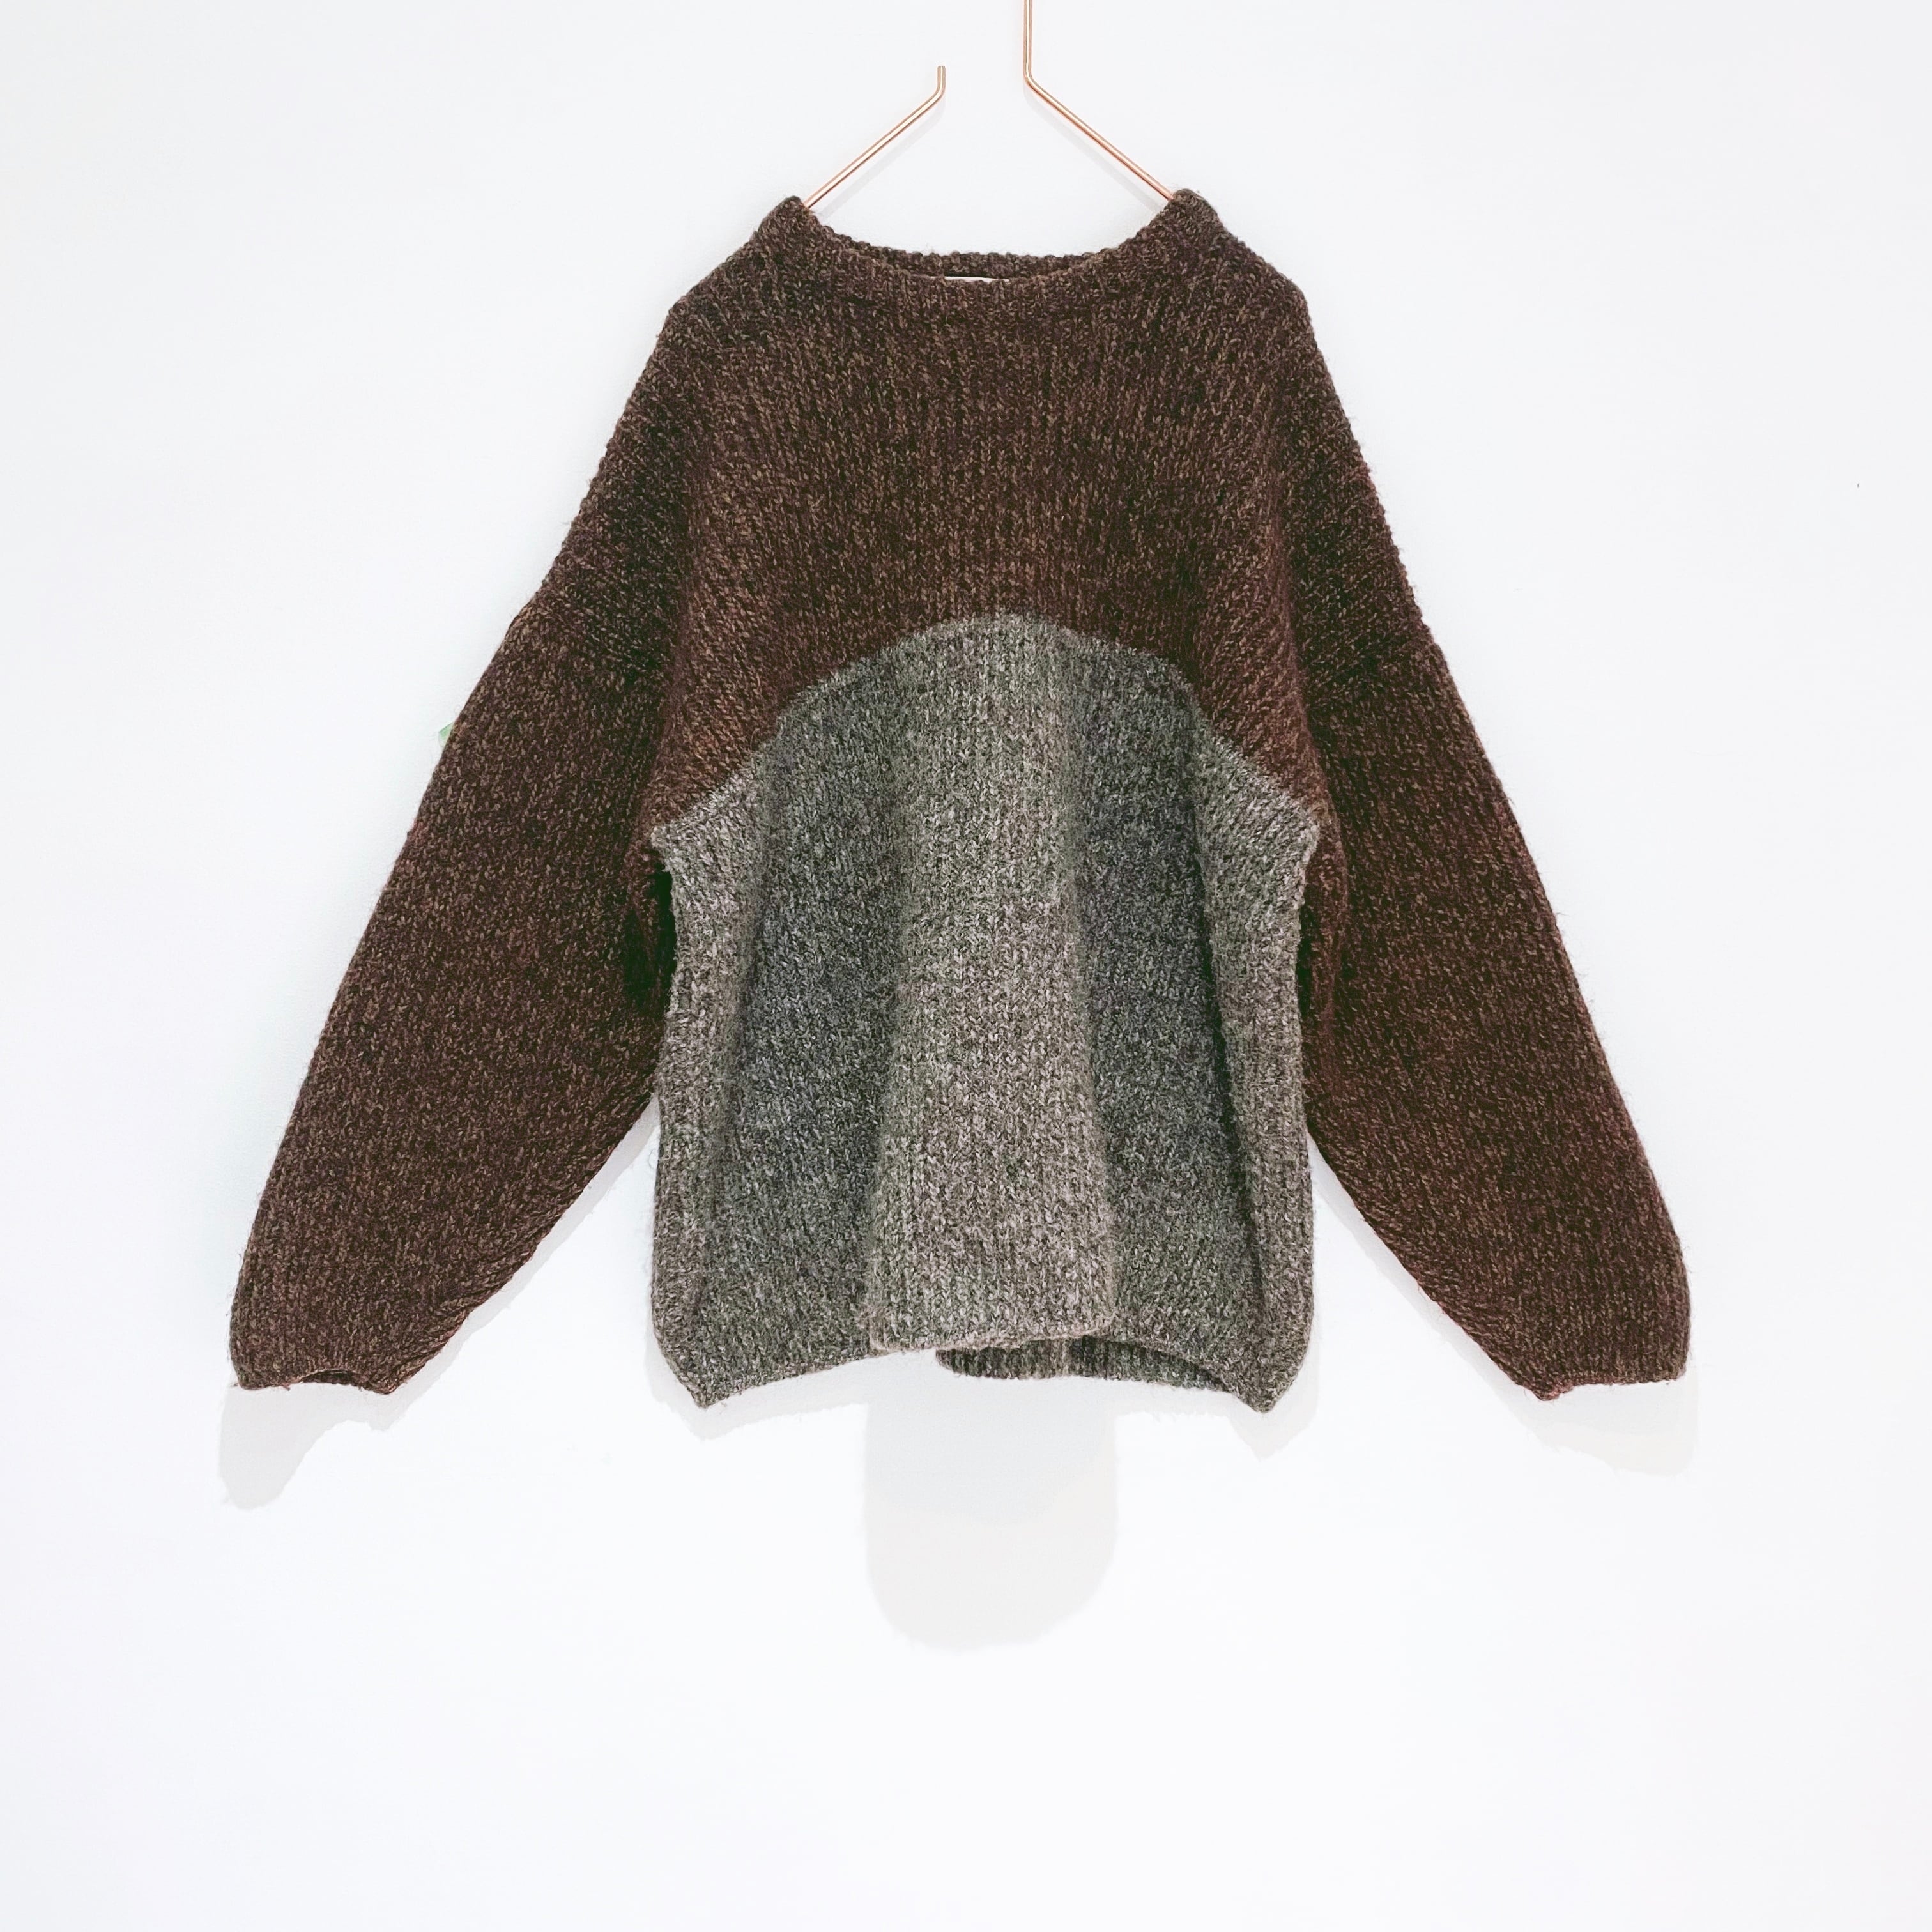 ◼︎80s vintage bi-color rib hand knitted sweater from Ireland◼︎